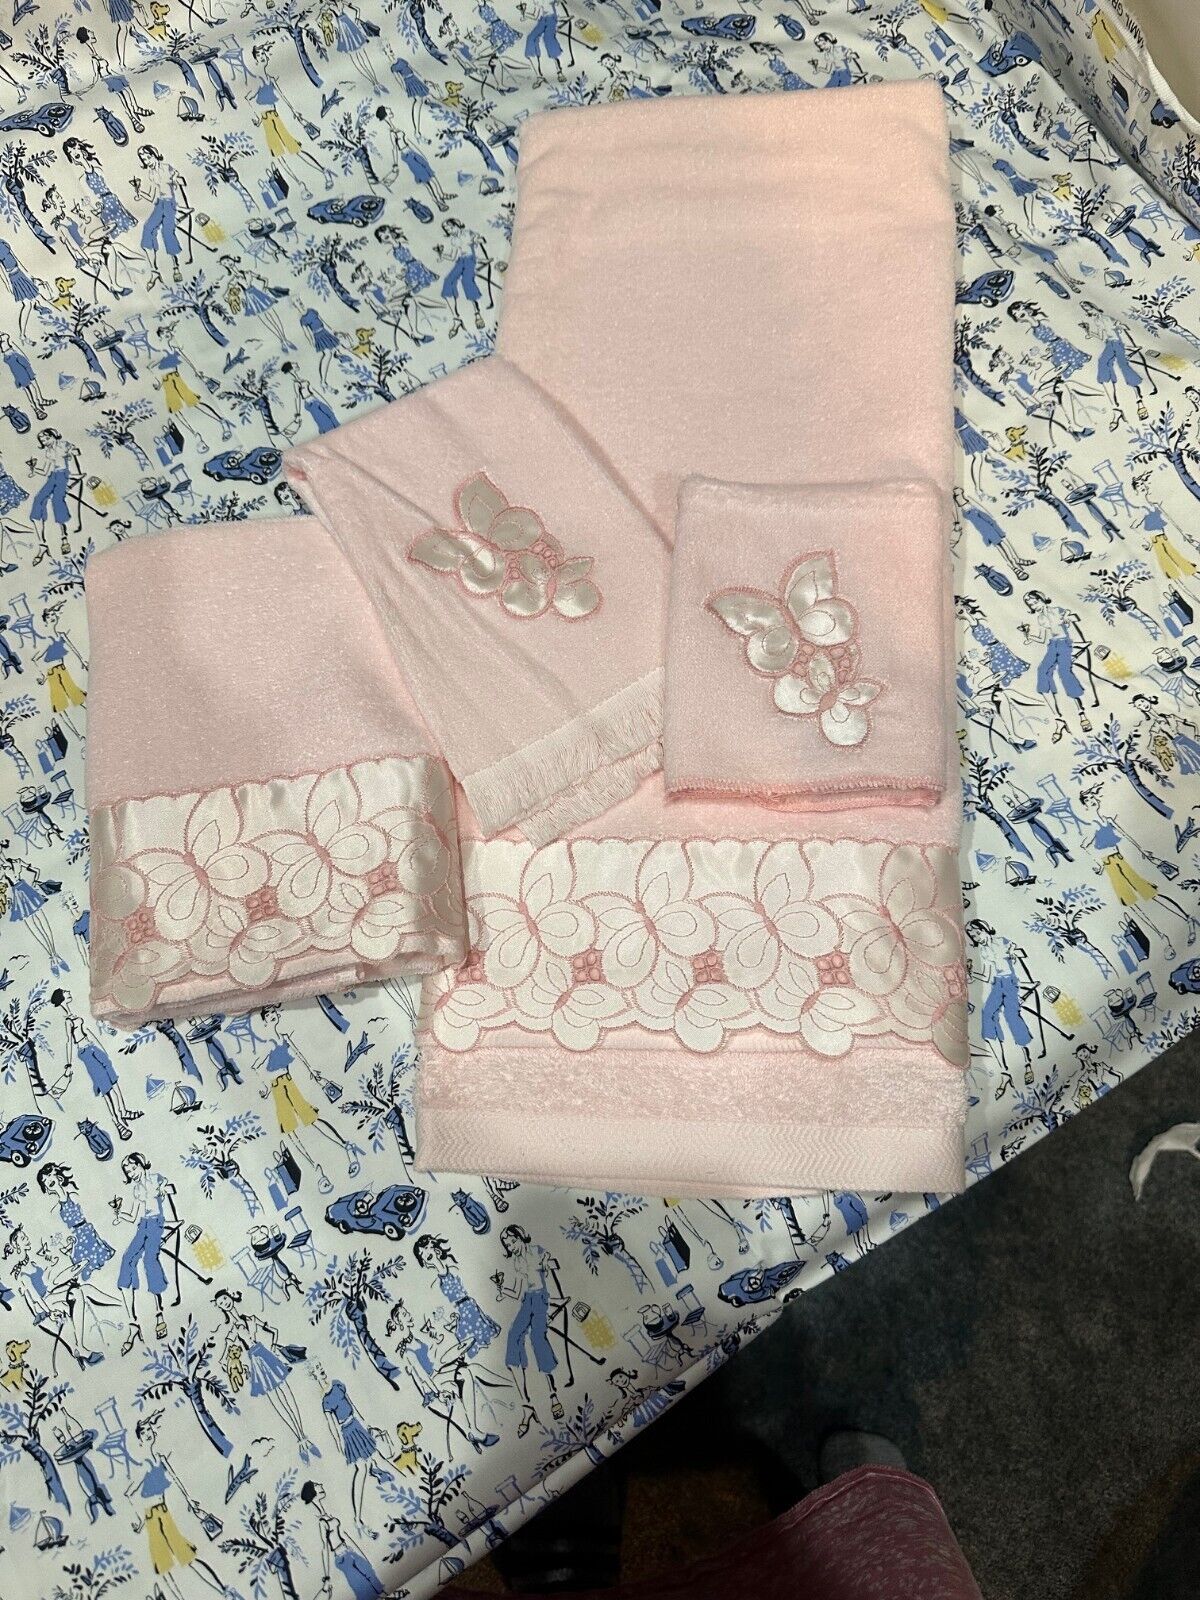 Vintage After Bath Luxury by J. Abouchar & Sons Bath Towel Set- Pink Butterfly